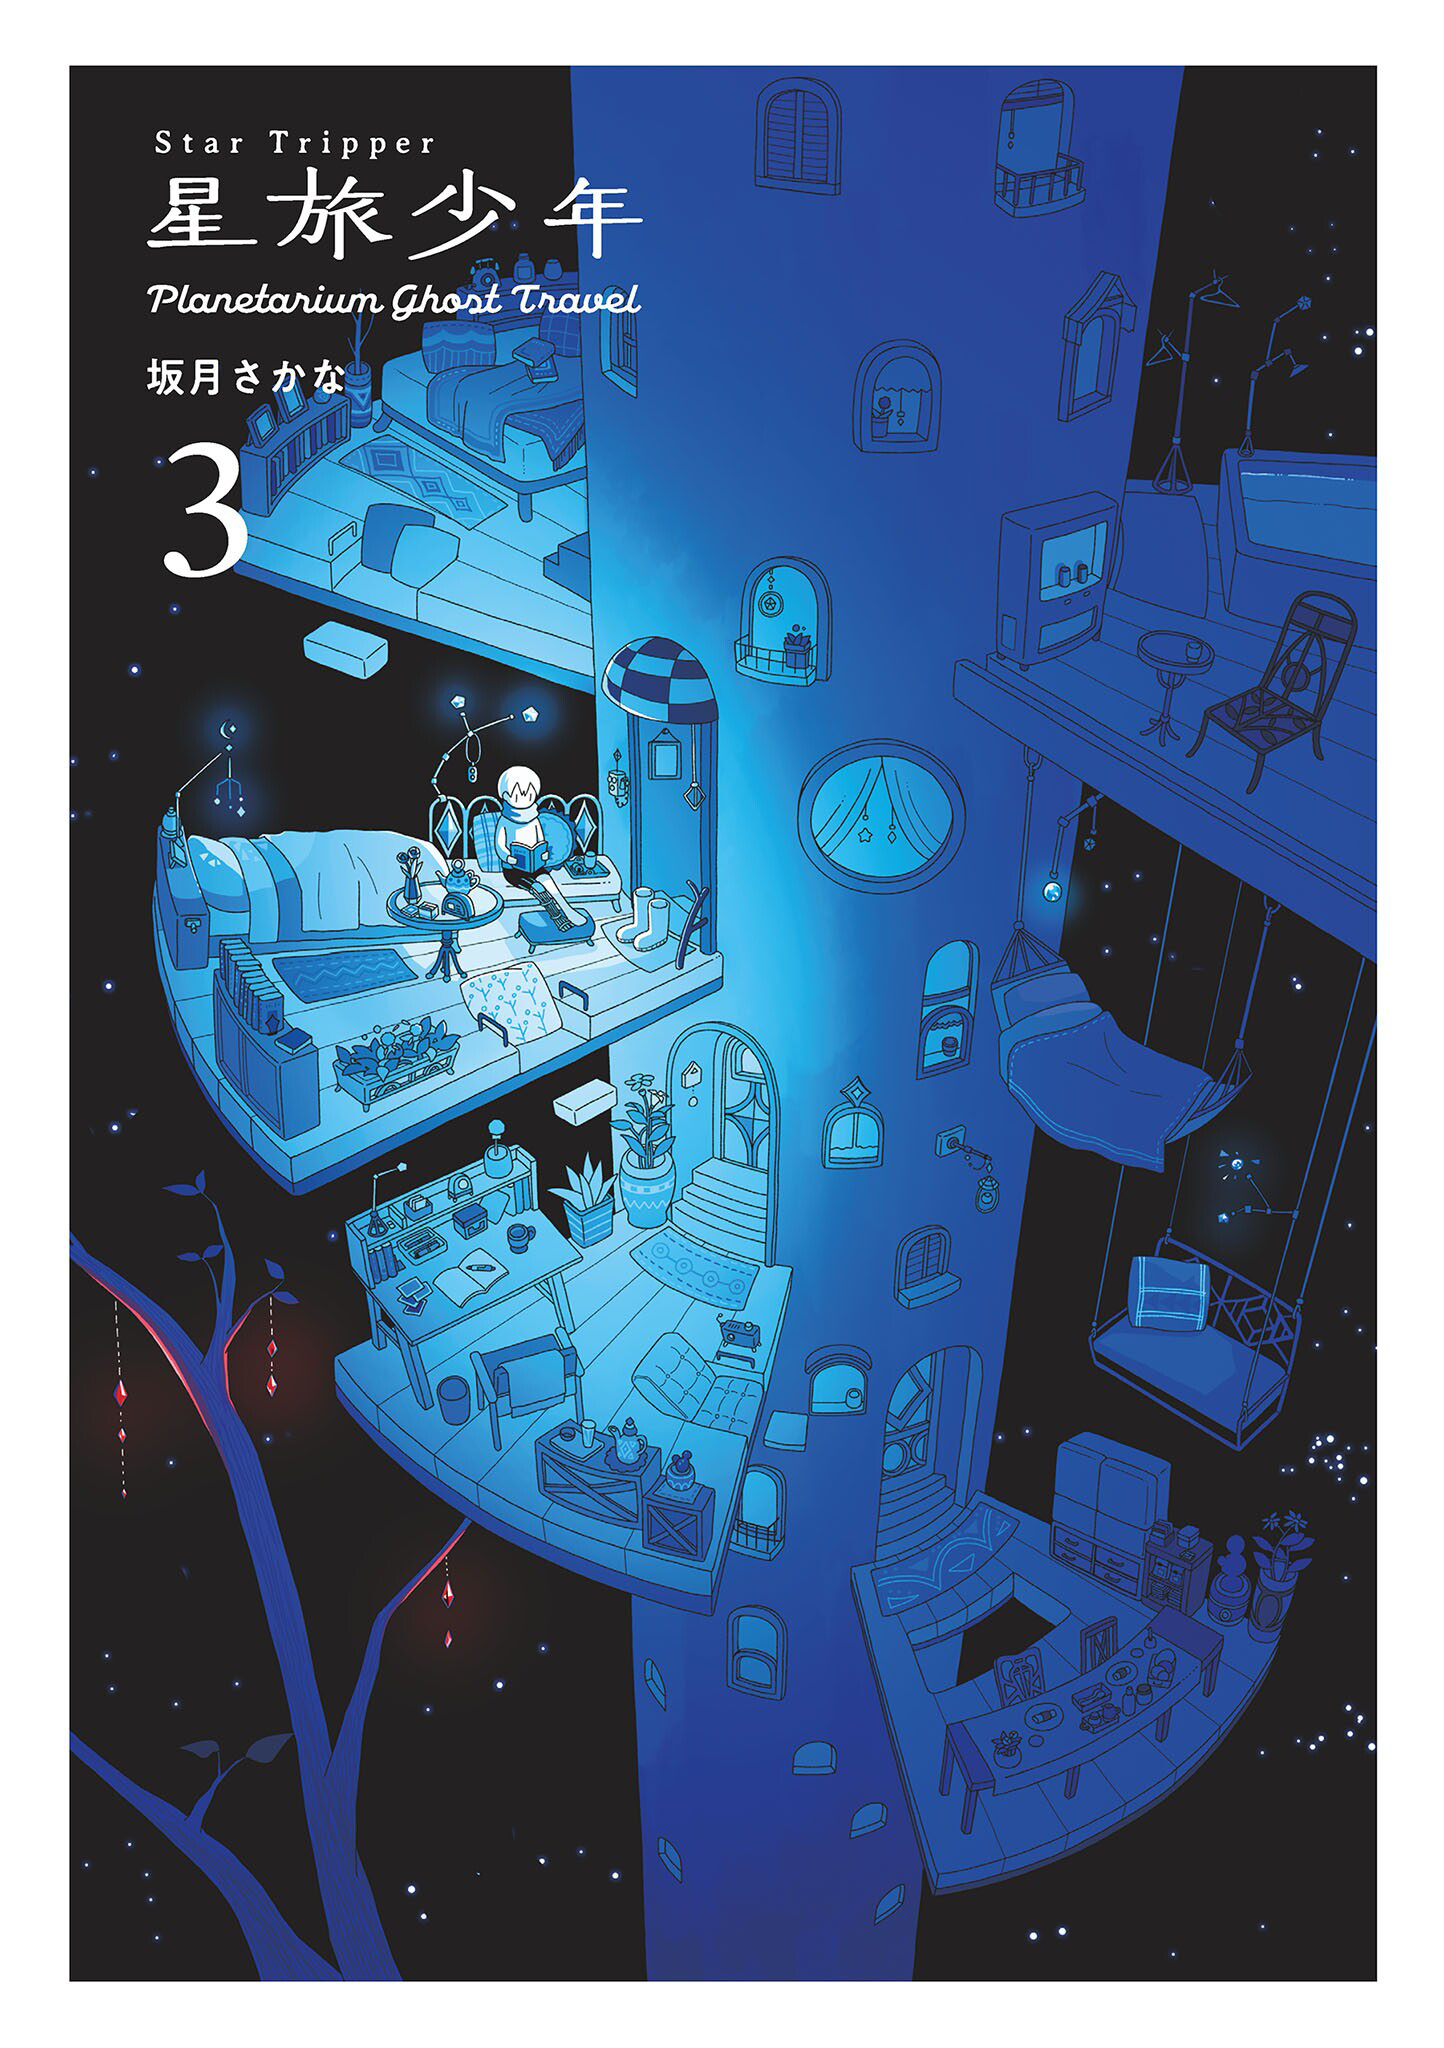 Star Tripper: Planetarium Ghost Travel Vol.3 Chapter 11.99: Cover + Contents - Picture 1